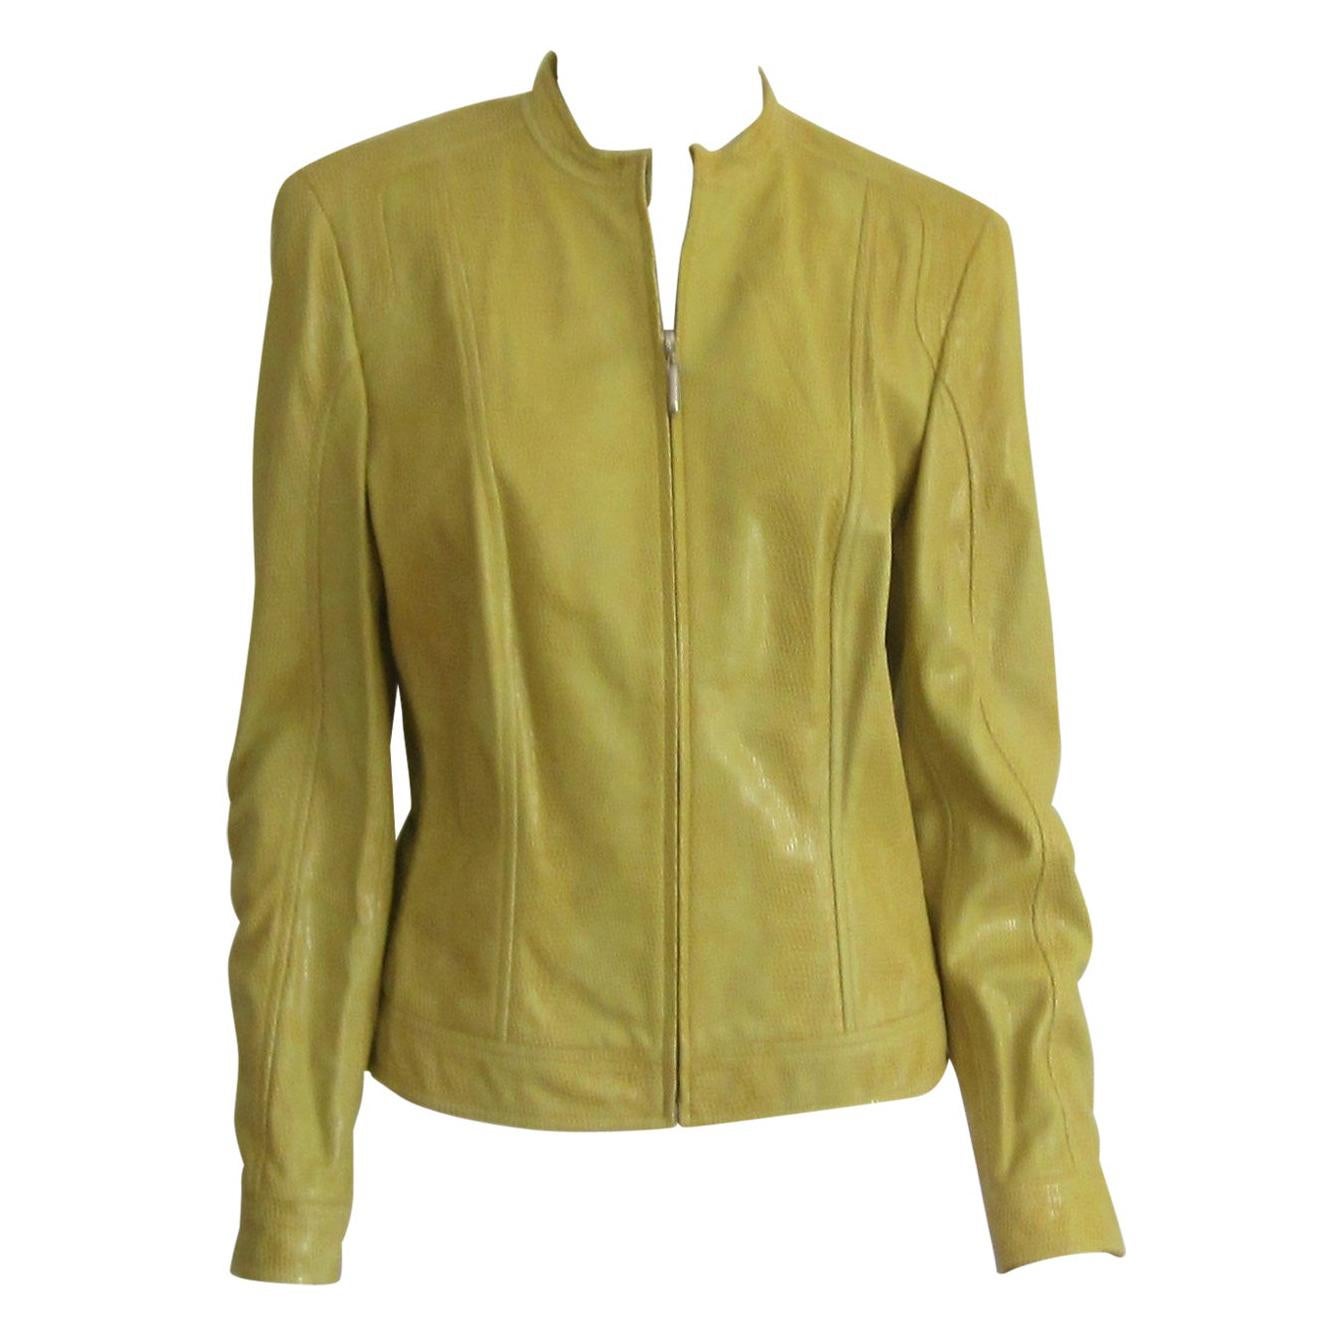  Escada Yellow Leather Fitted Jacket Reptile Embossed New With Tags 1990s  For Sale